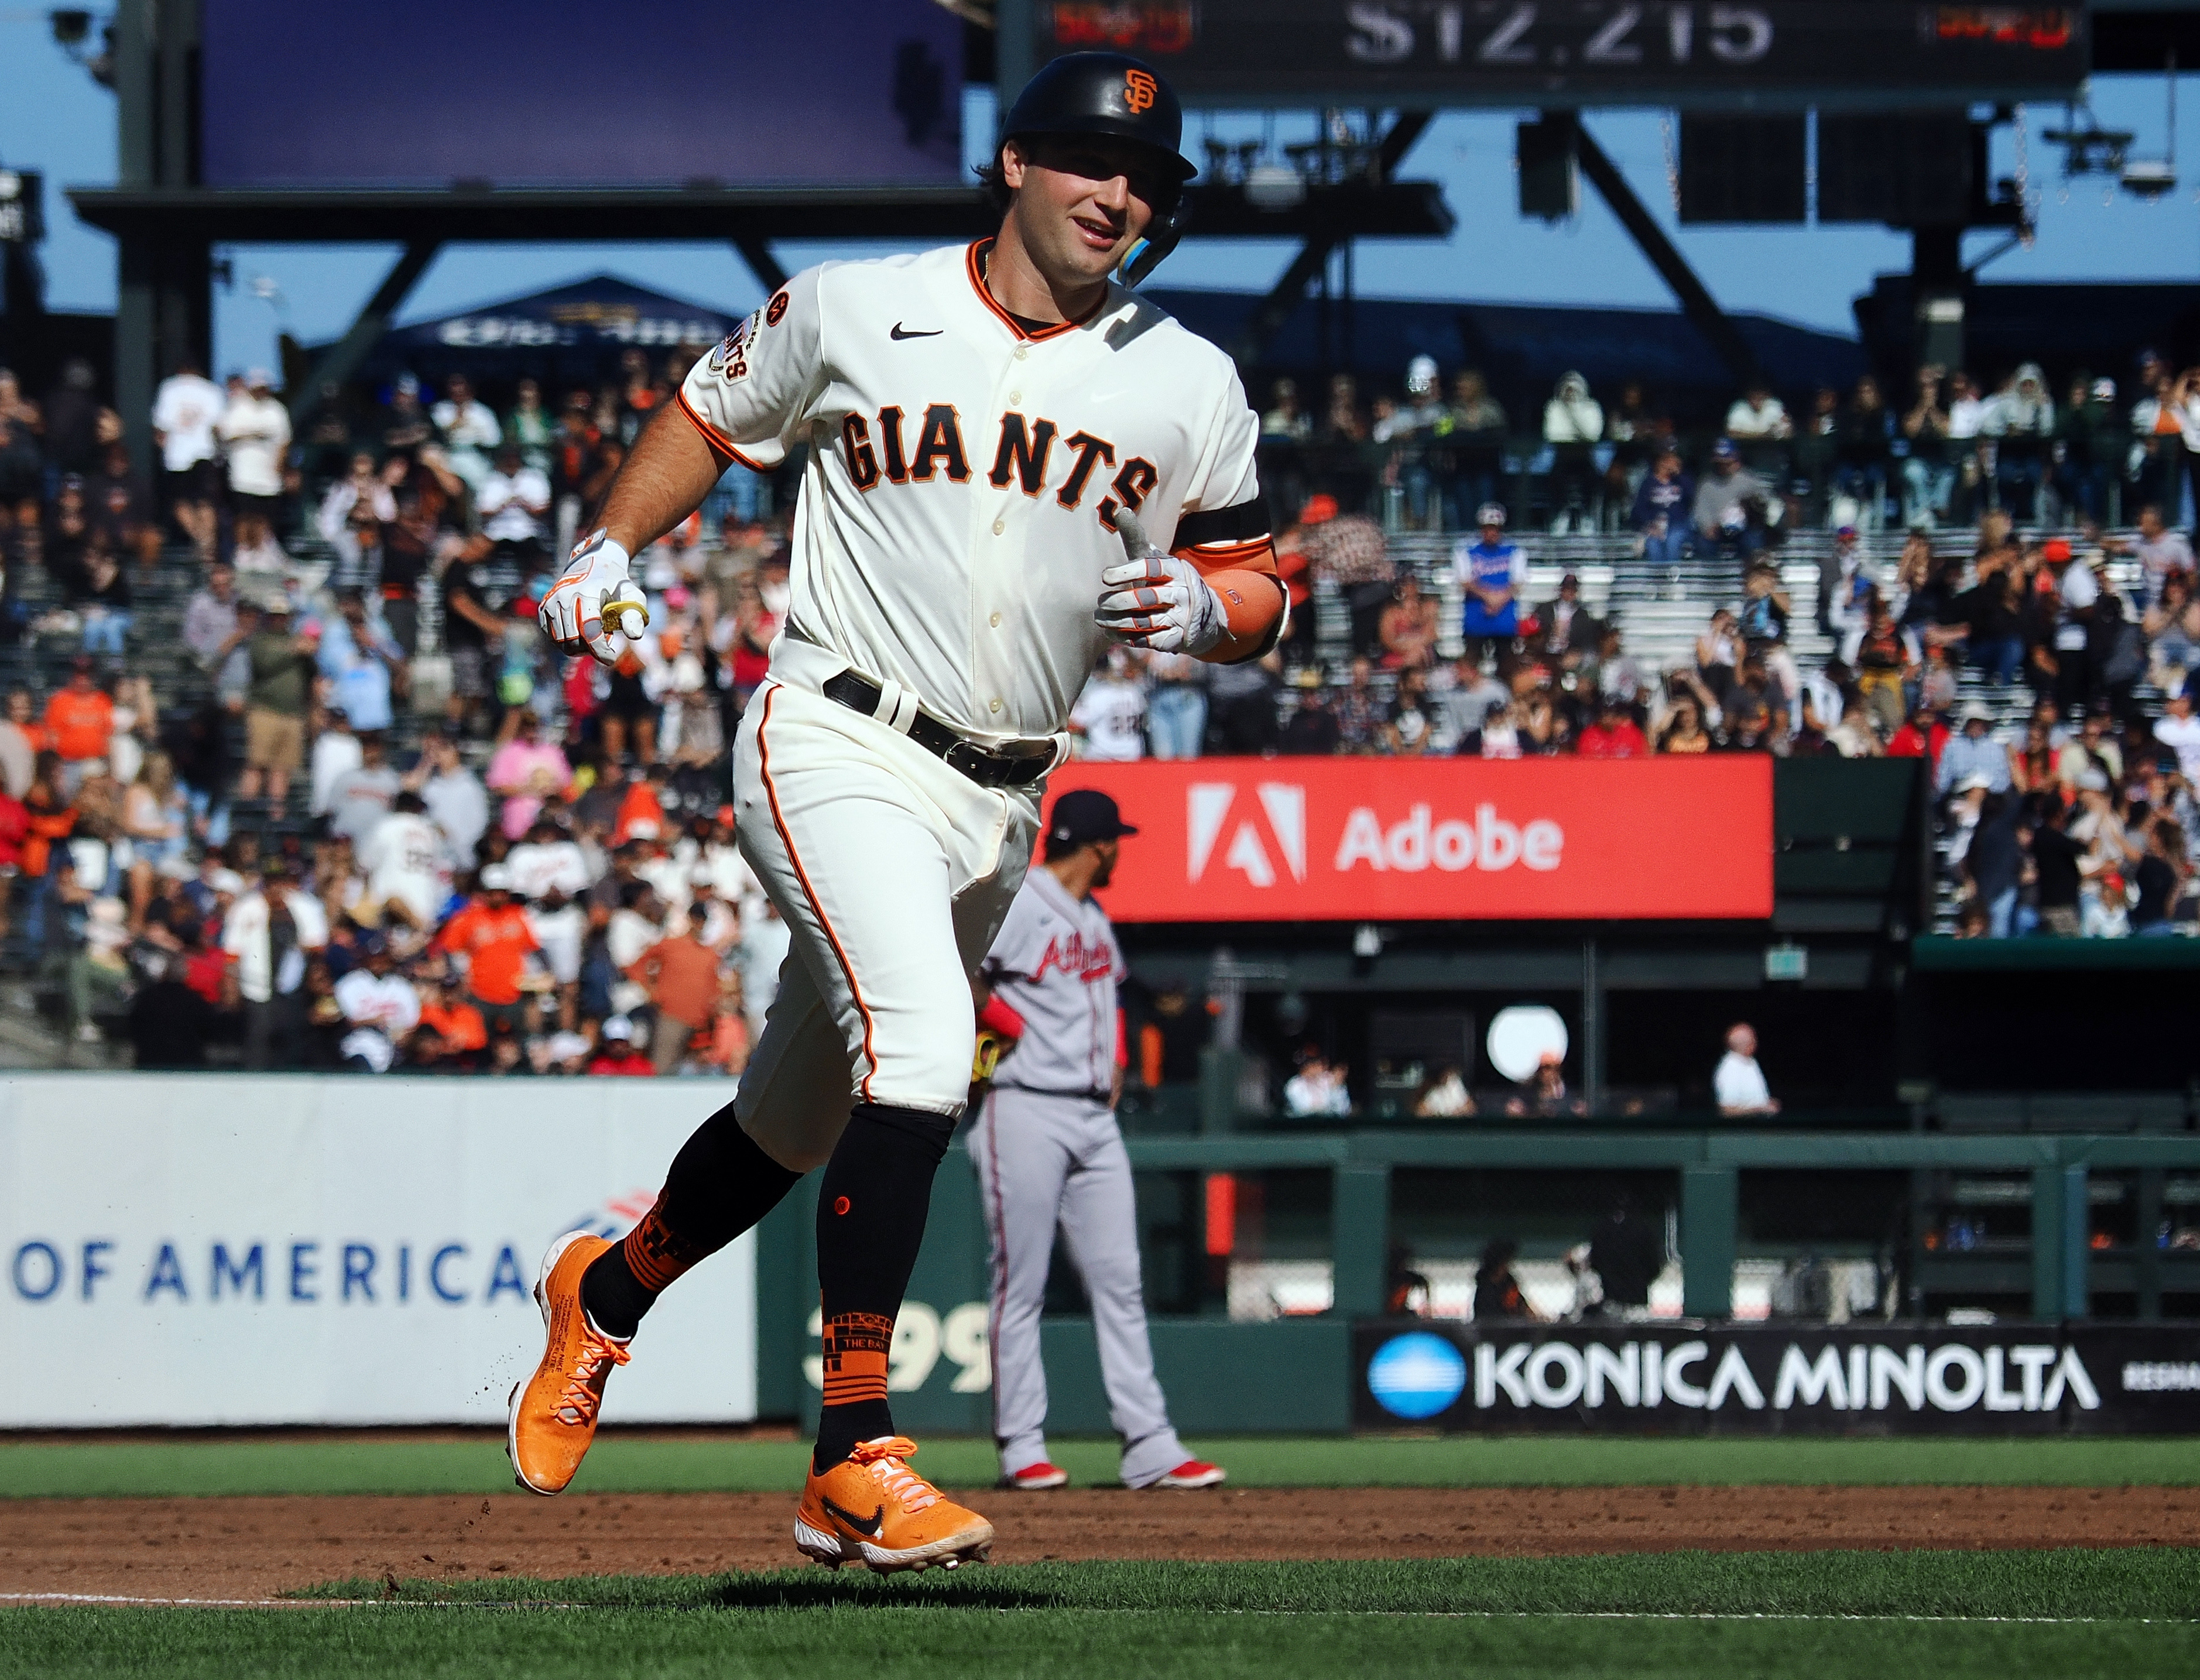 Giants stage comeback, force extra innings, avoid the sweep